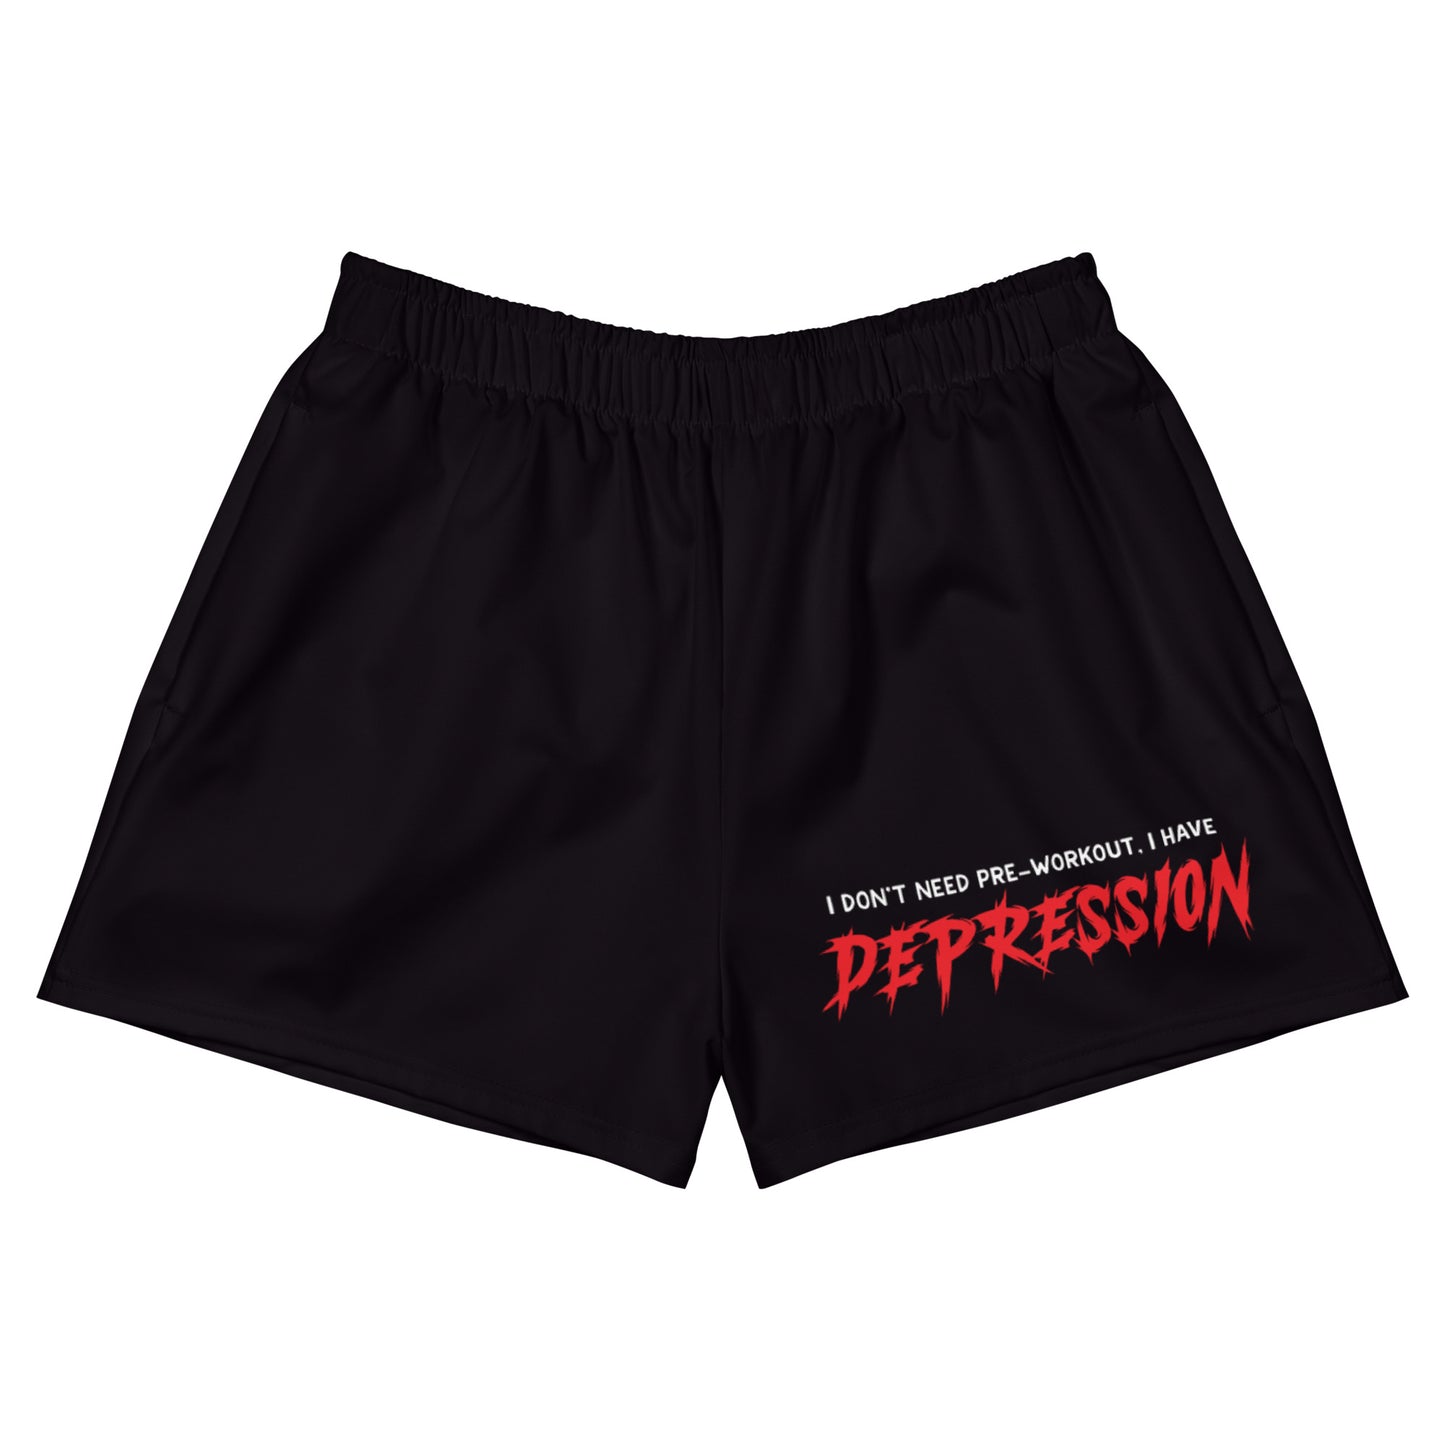 I Don't Need Pre-Workout I Have Depression Athletic Shorts (Short)